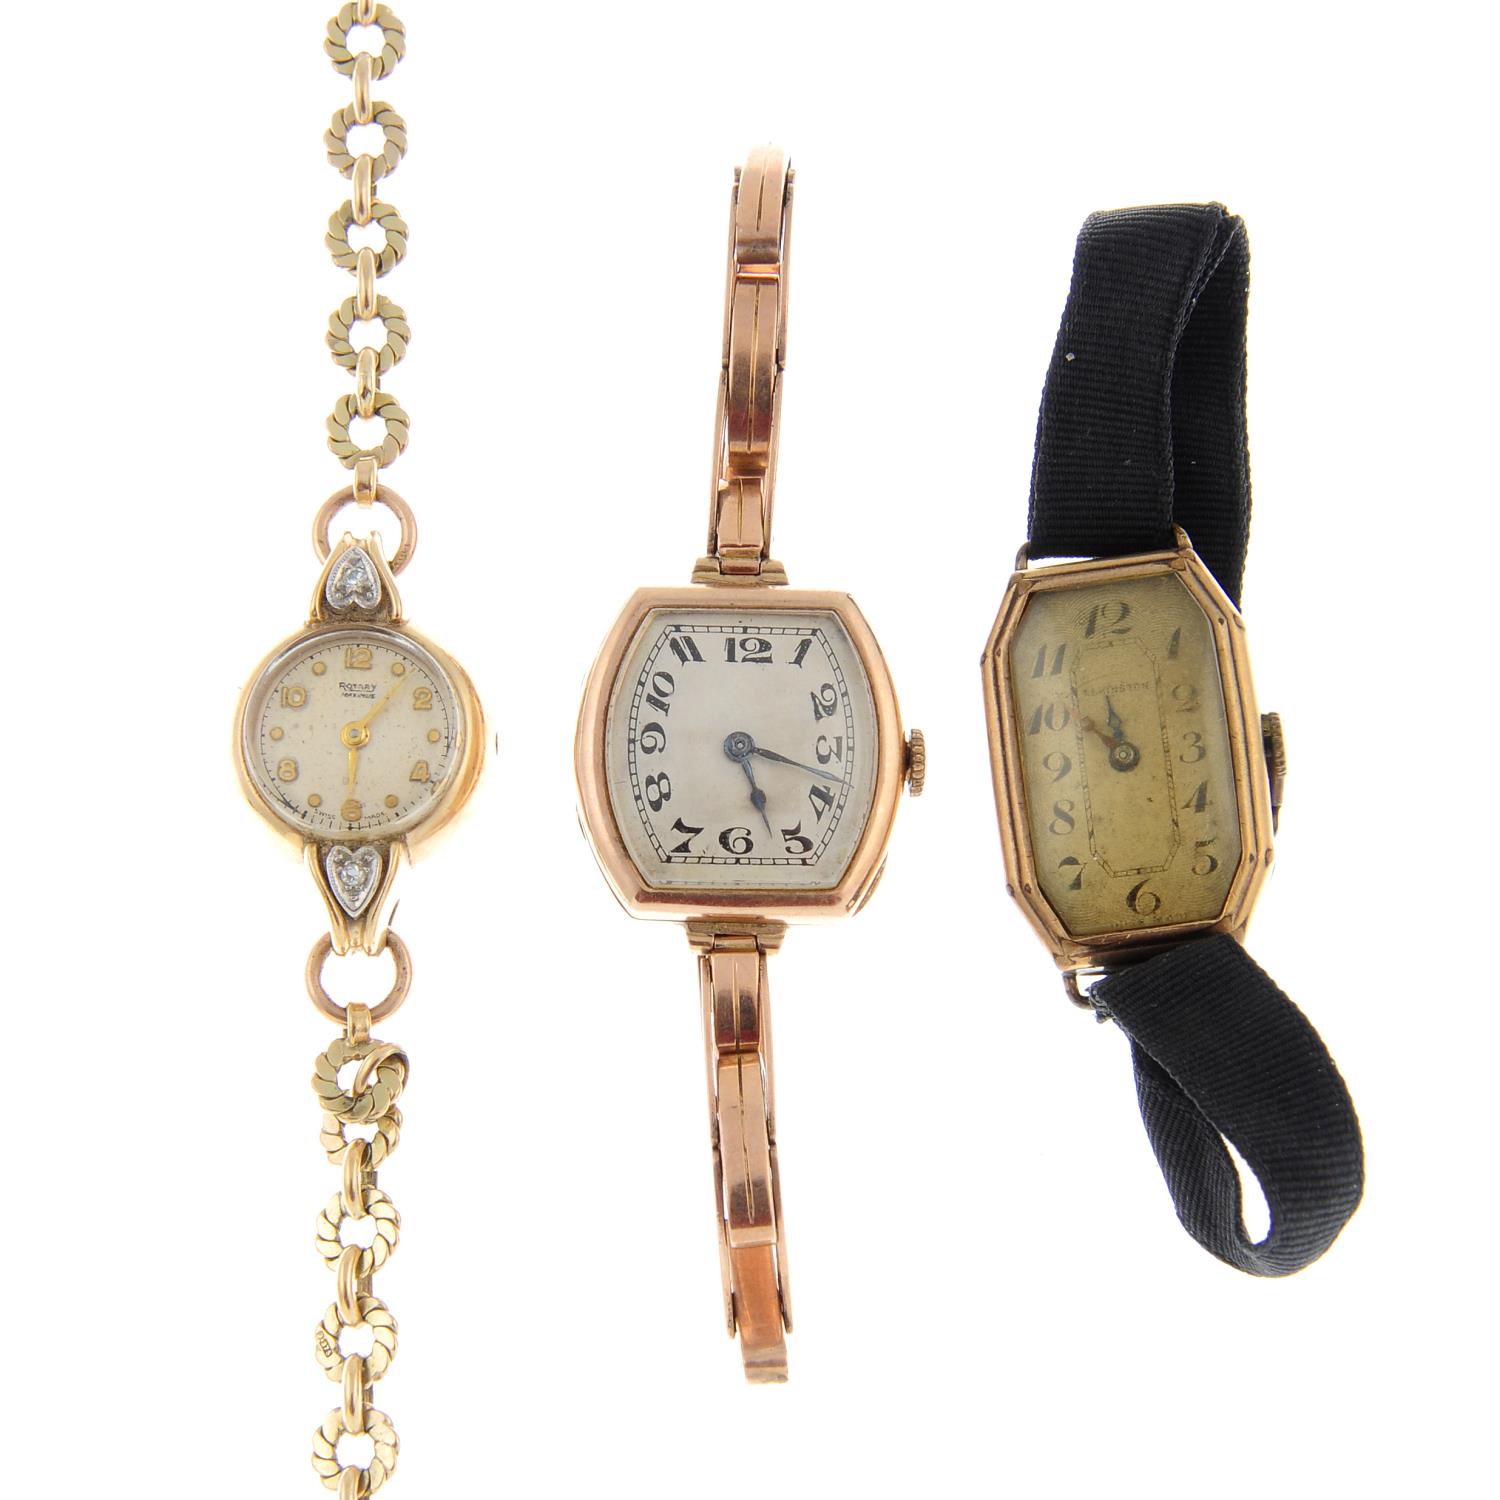 A group of six assorted lady's wrist watches.